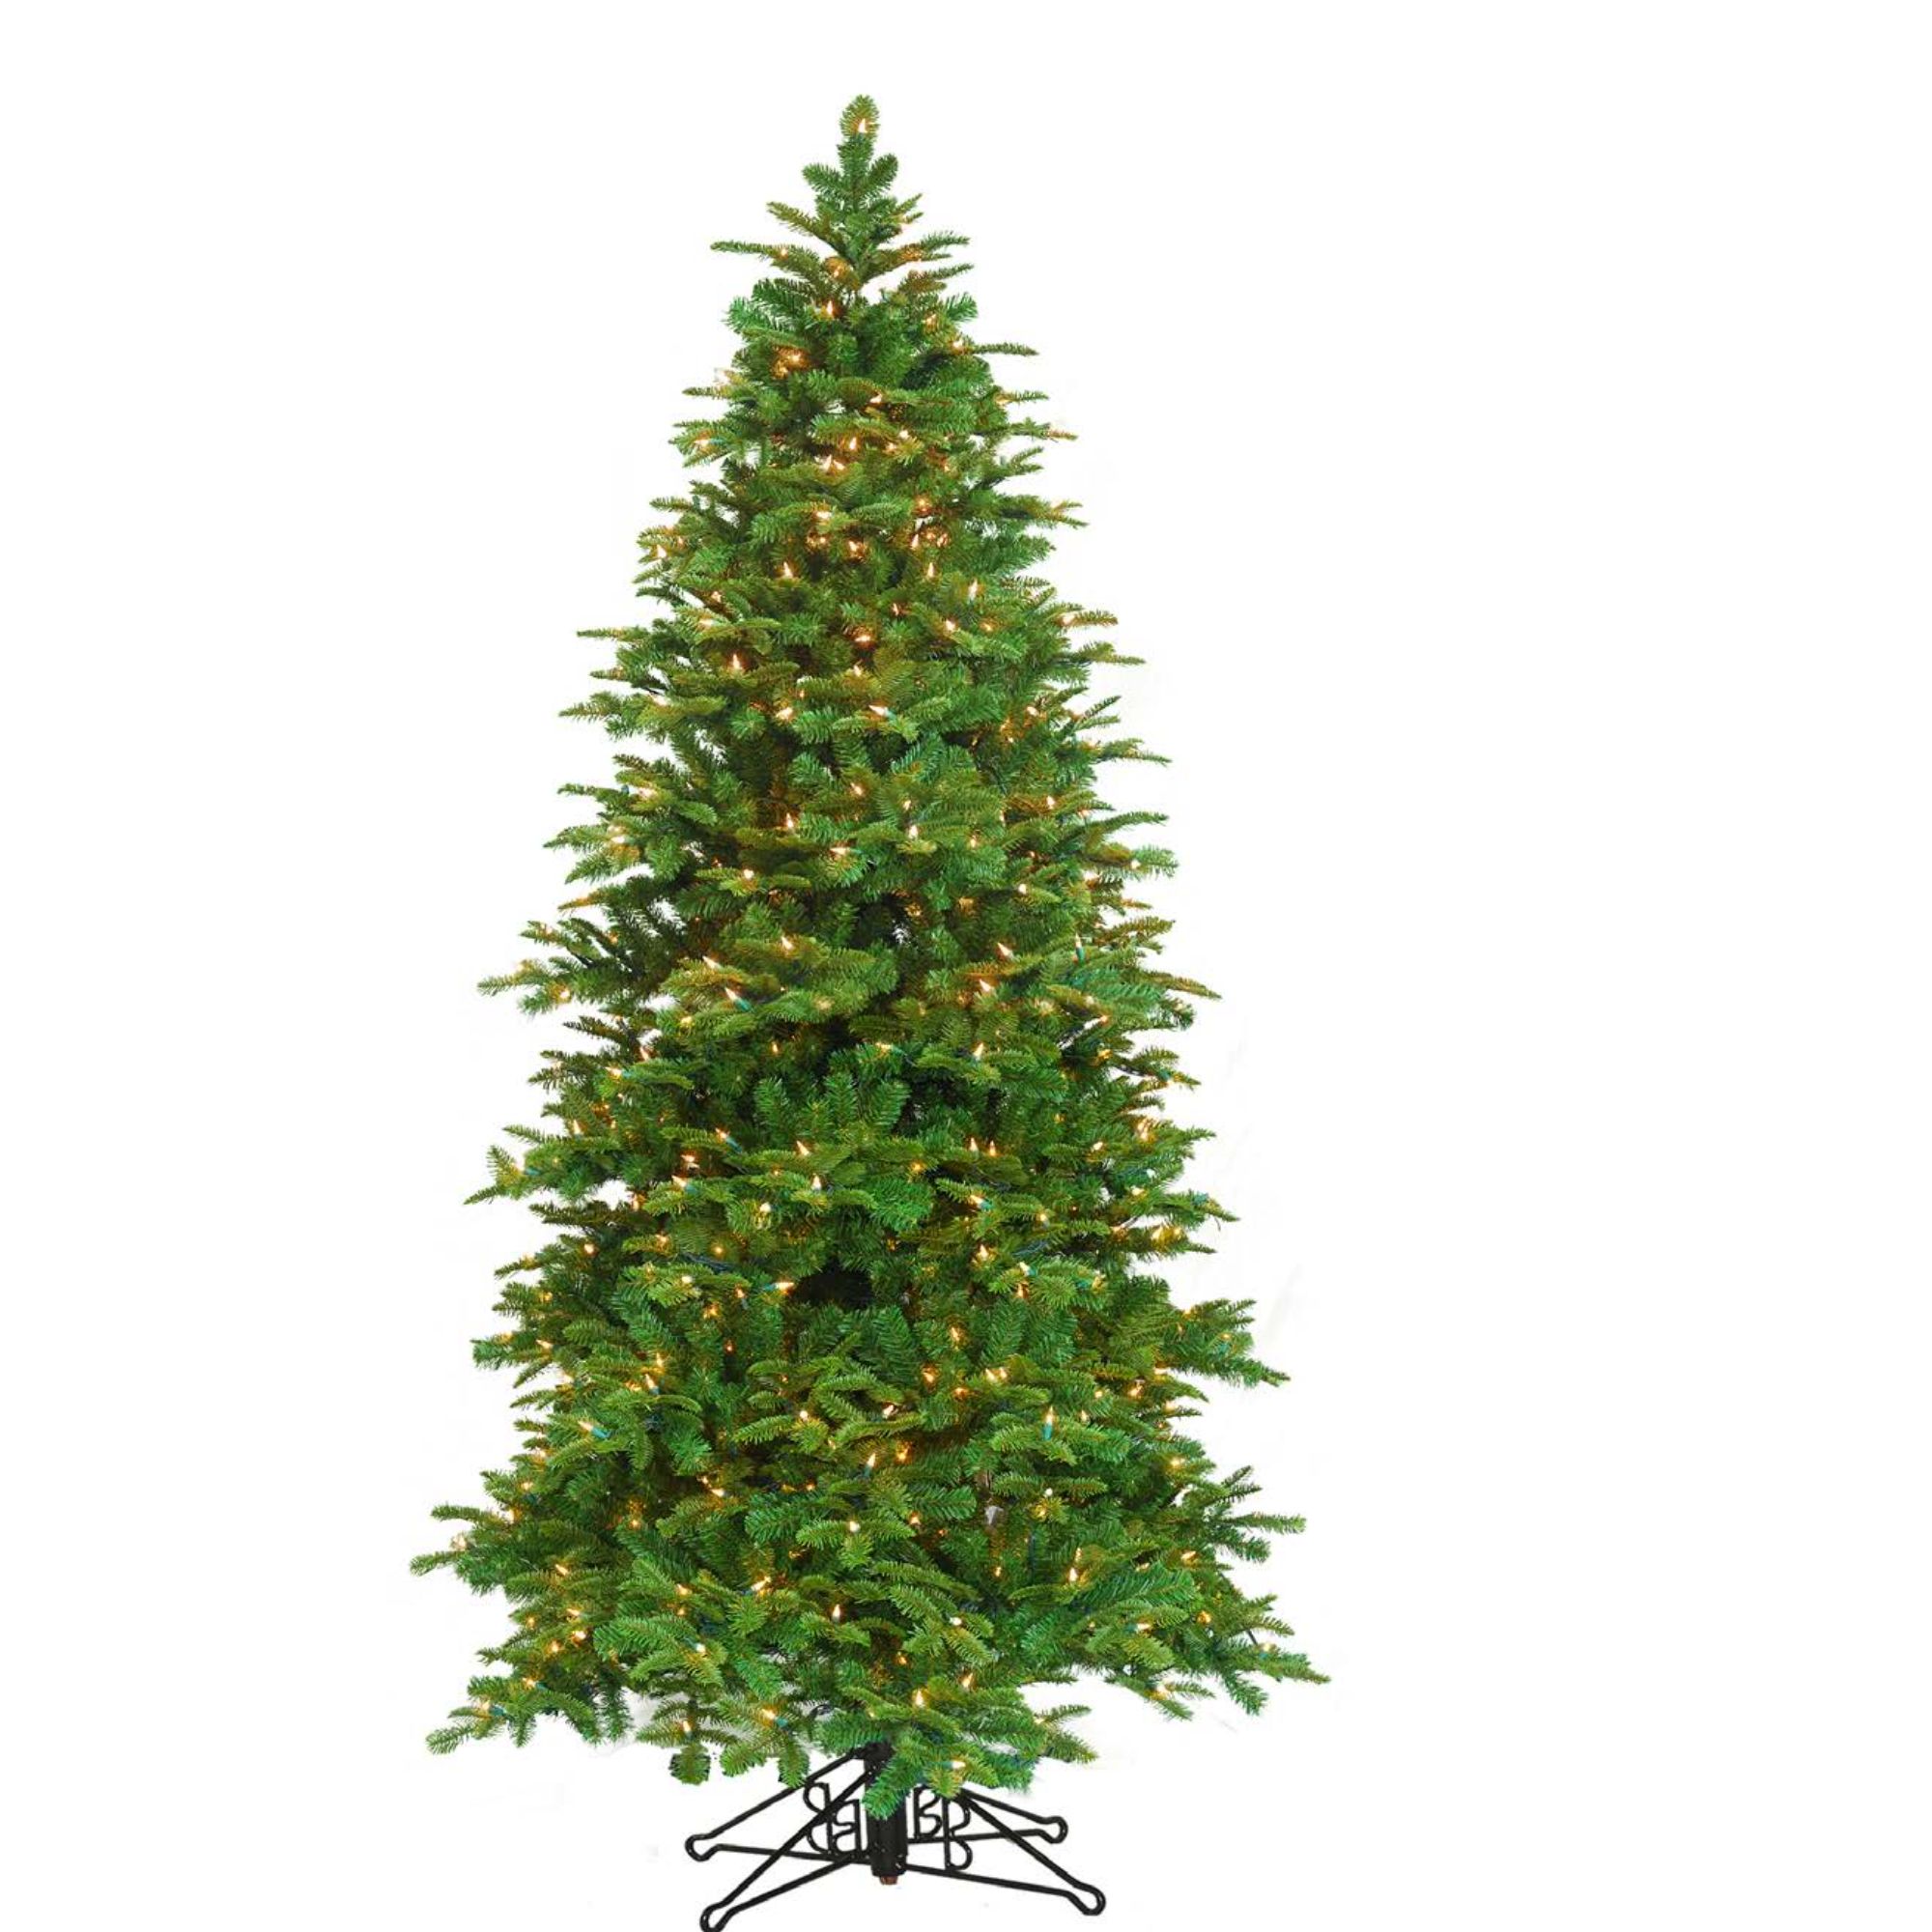 Barcana 7.5' Pre-Lit Slim Tiffany Pine Deluxe Artificial Christmas Tree, White Lights